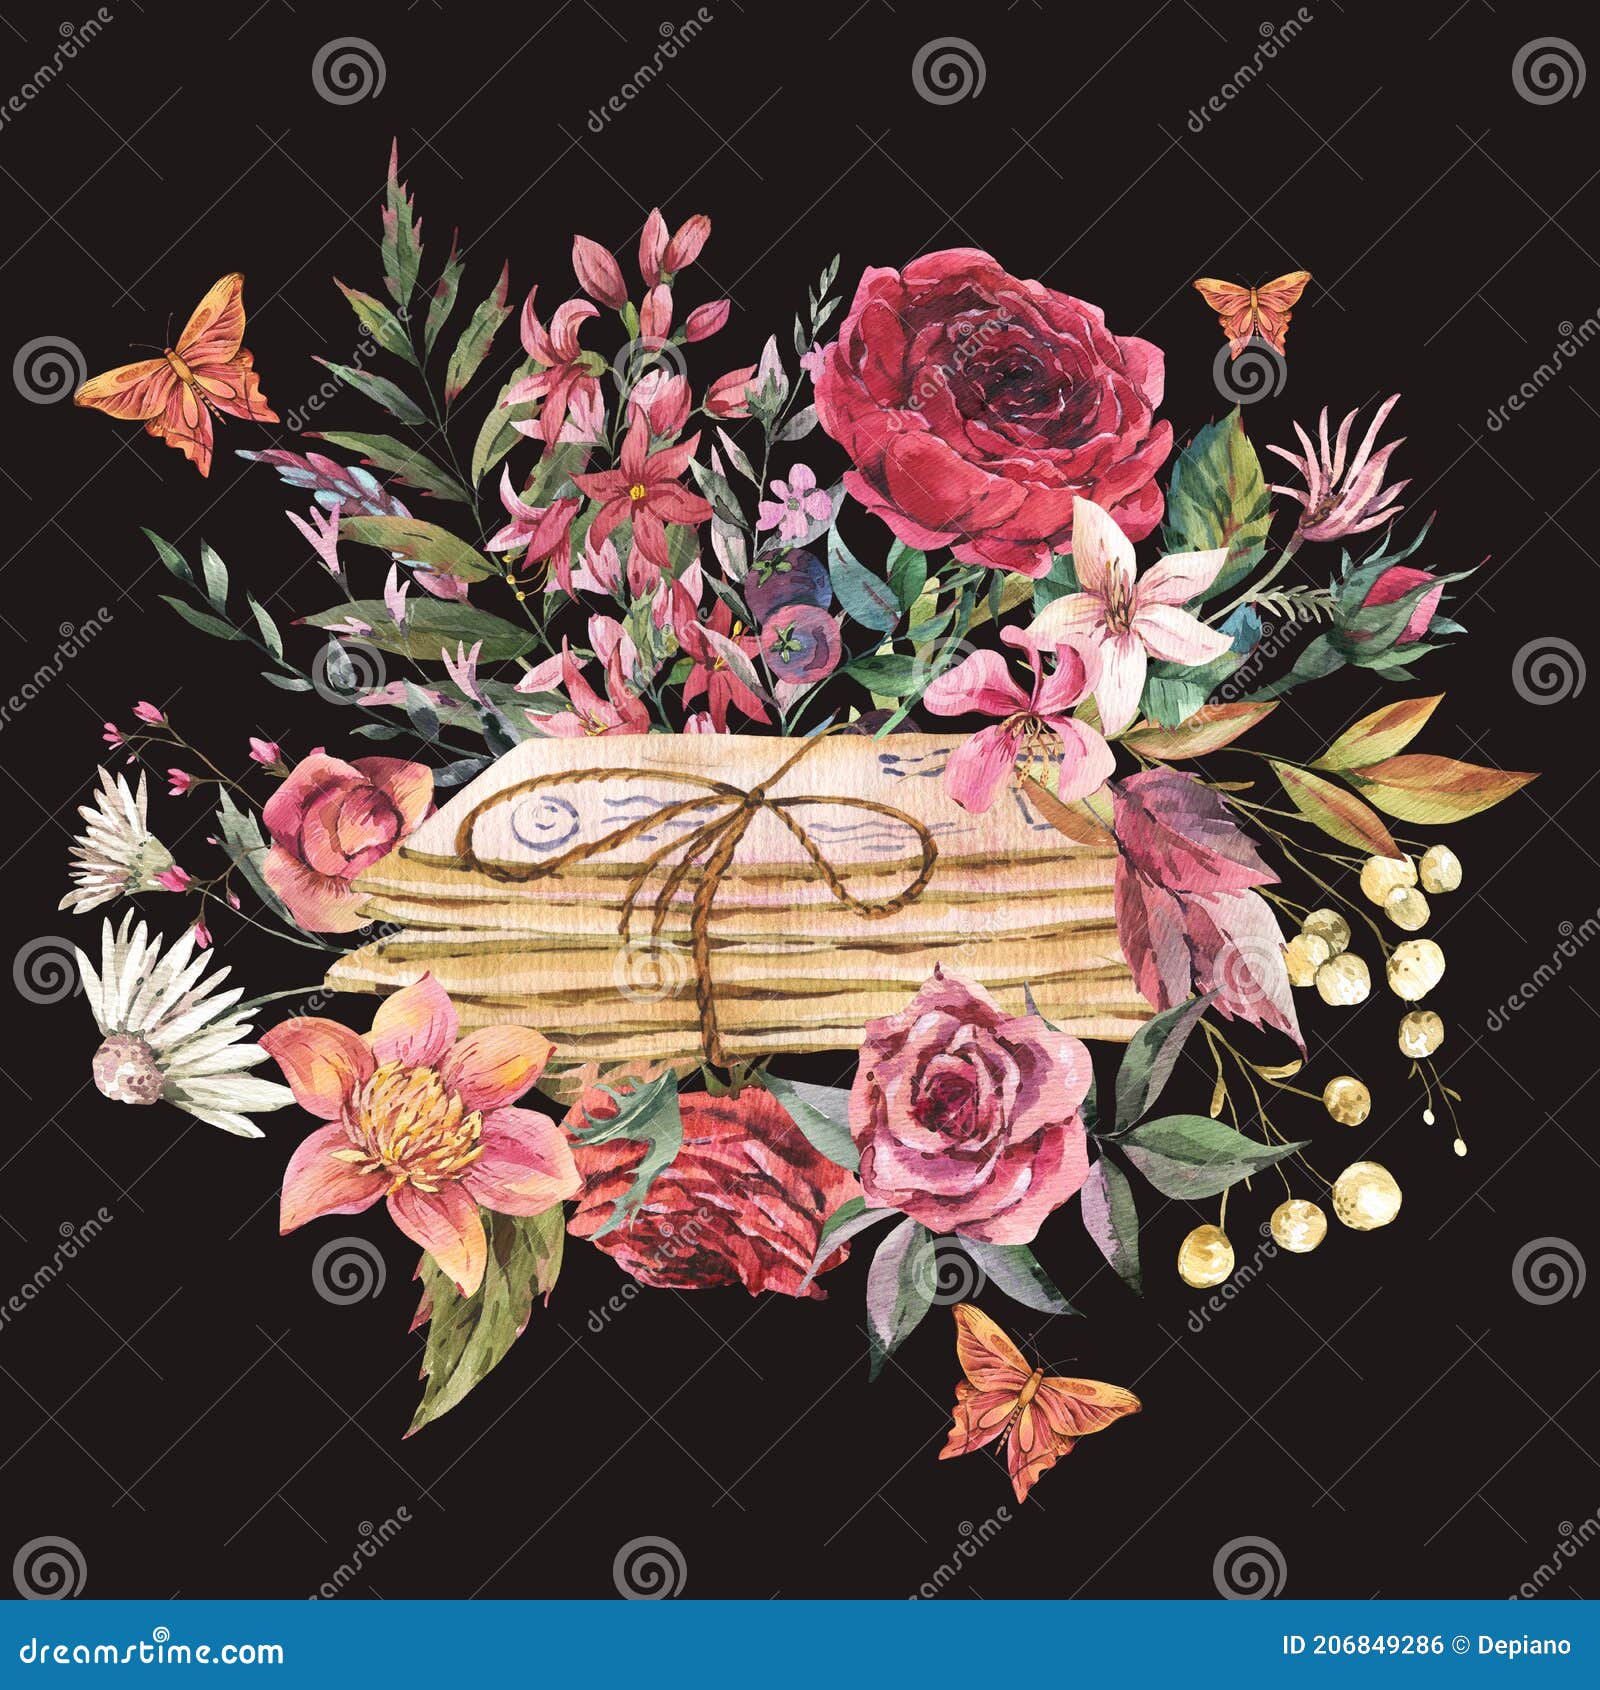 vintage old letters with flowers. natural greeting card. dark academia floral 